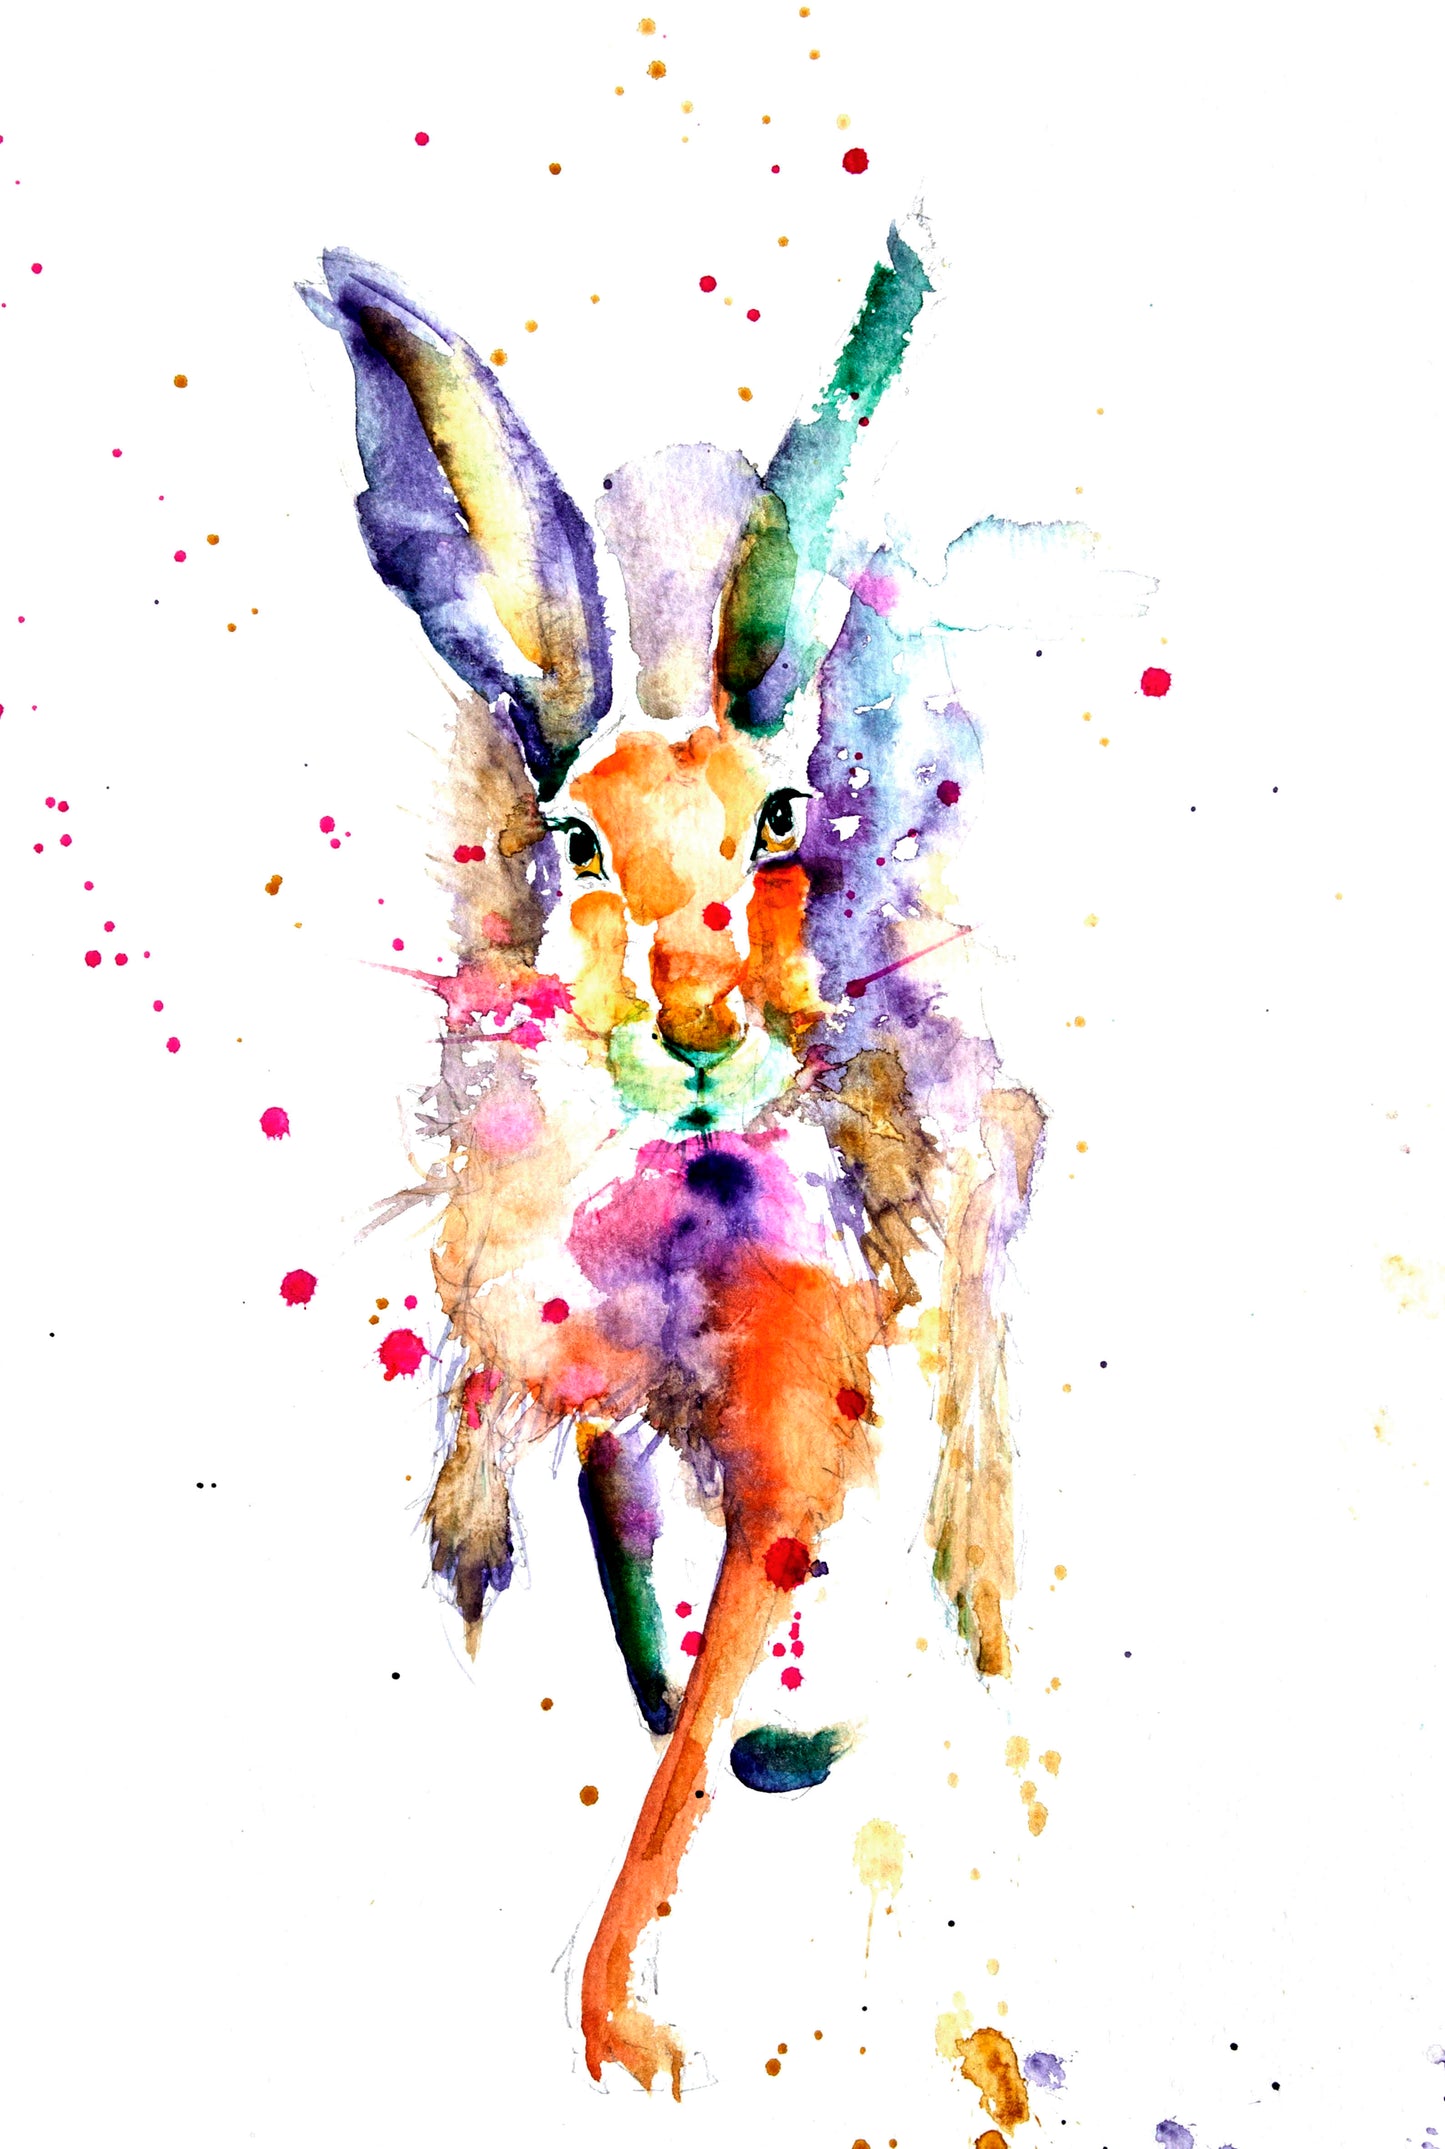 limited edition PRINT of my original running HARE watercolour - Jen Buckley Art limited edition animal art prints